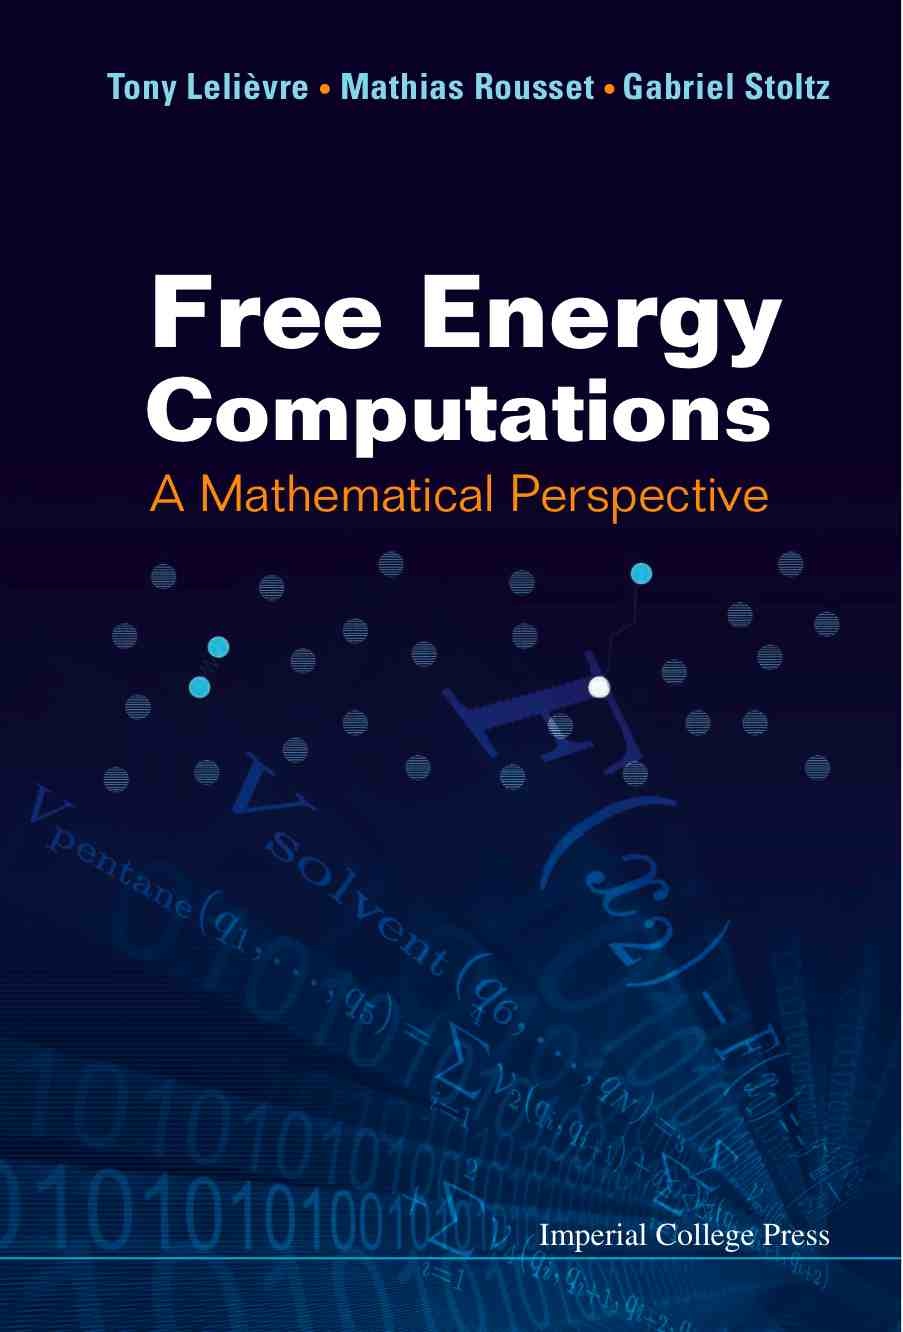 Free Energy Computations:
            A mathematical perspective